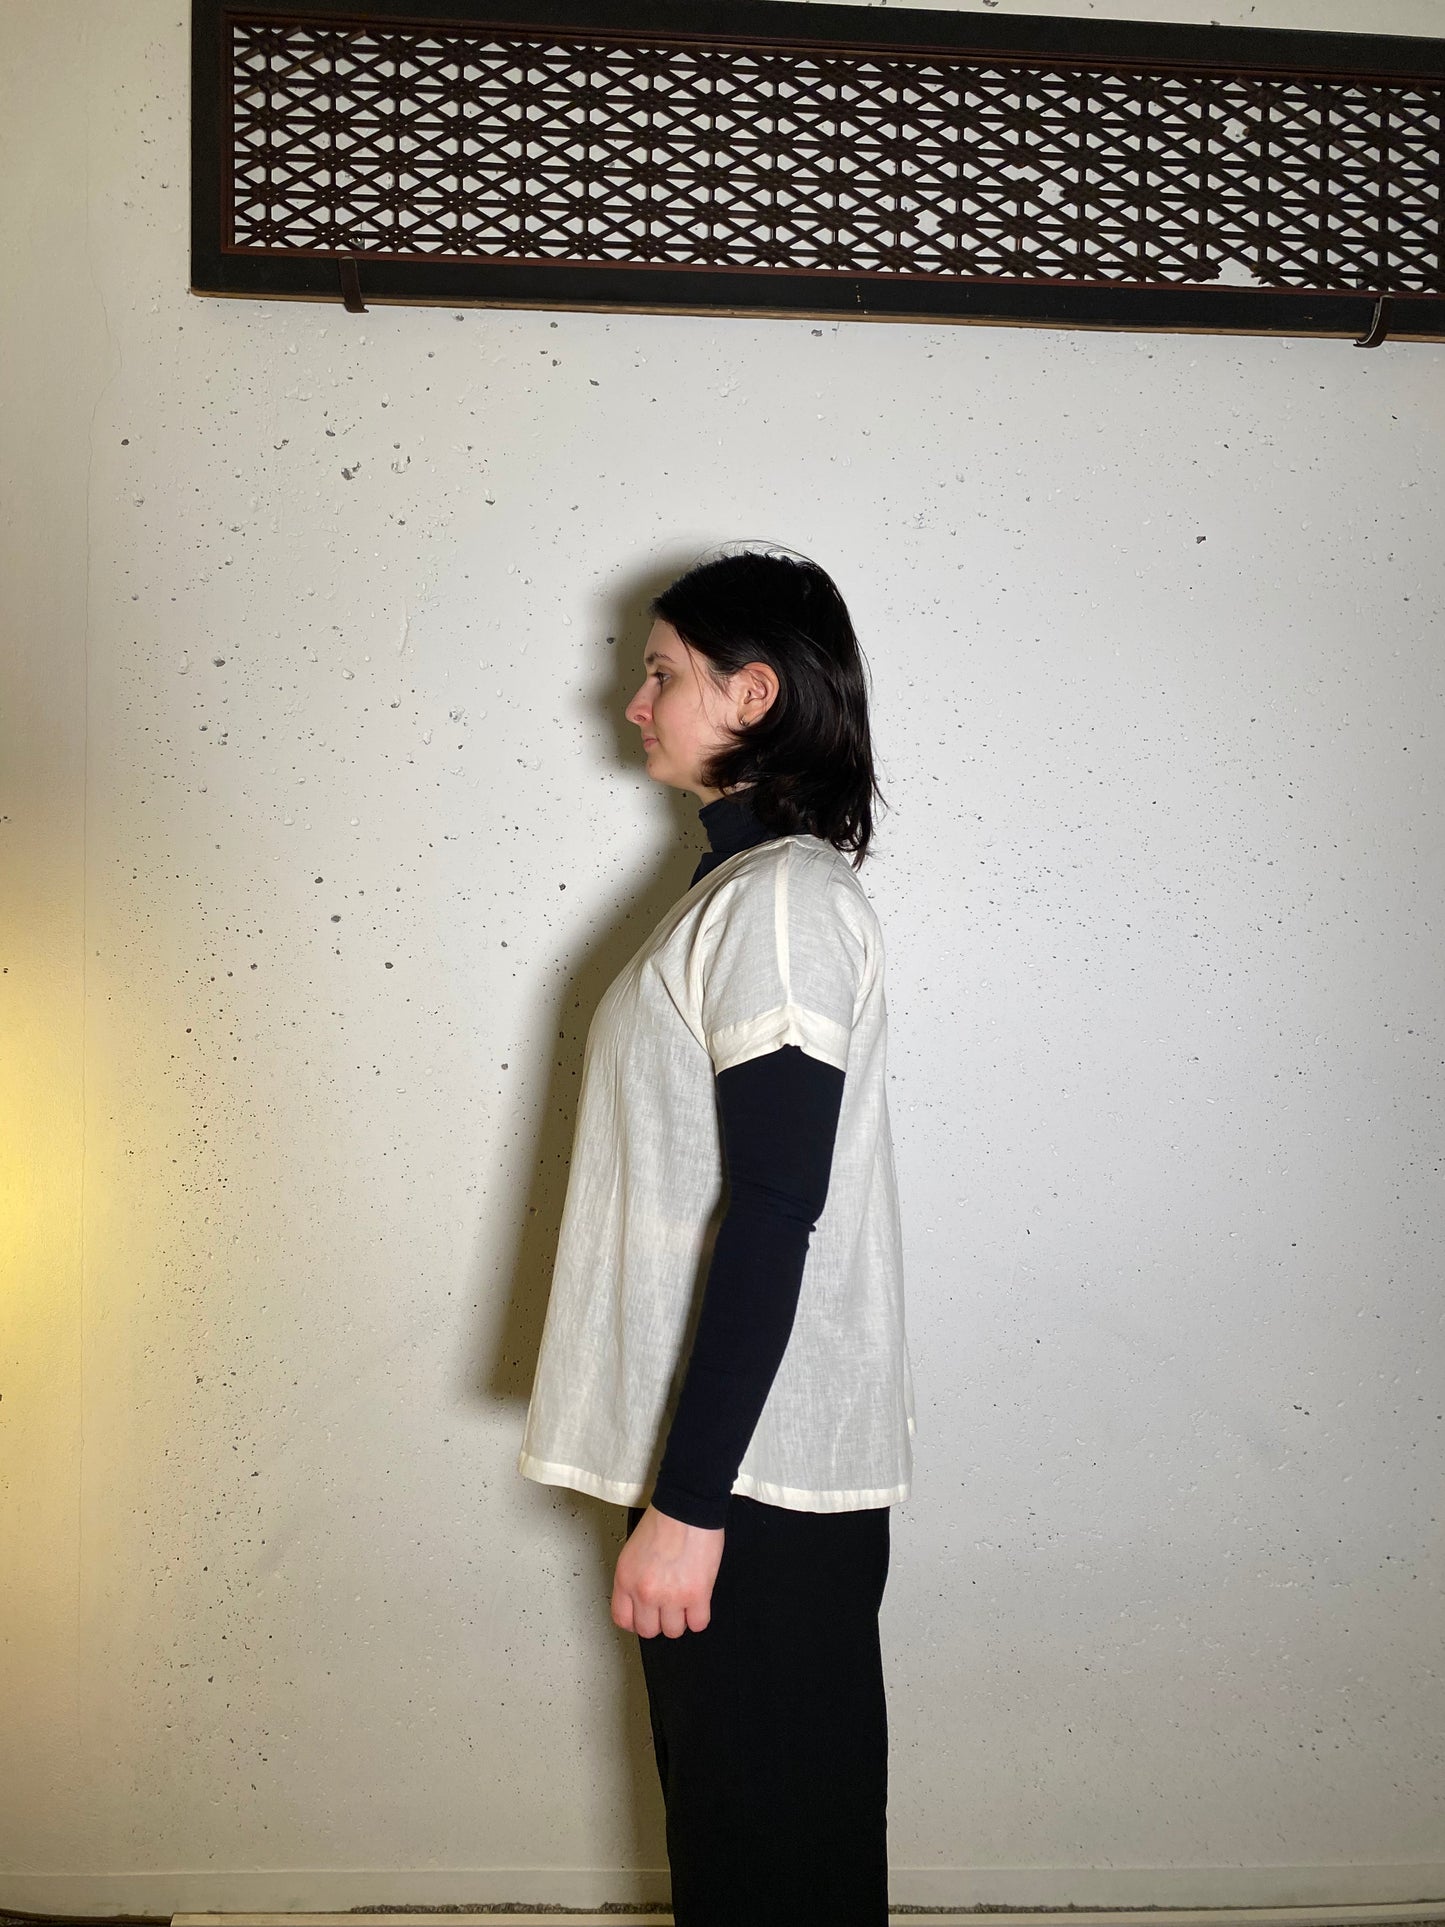 Short-sleeved shirts made from old summer kimonos